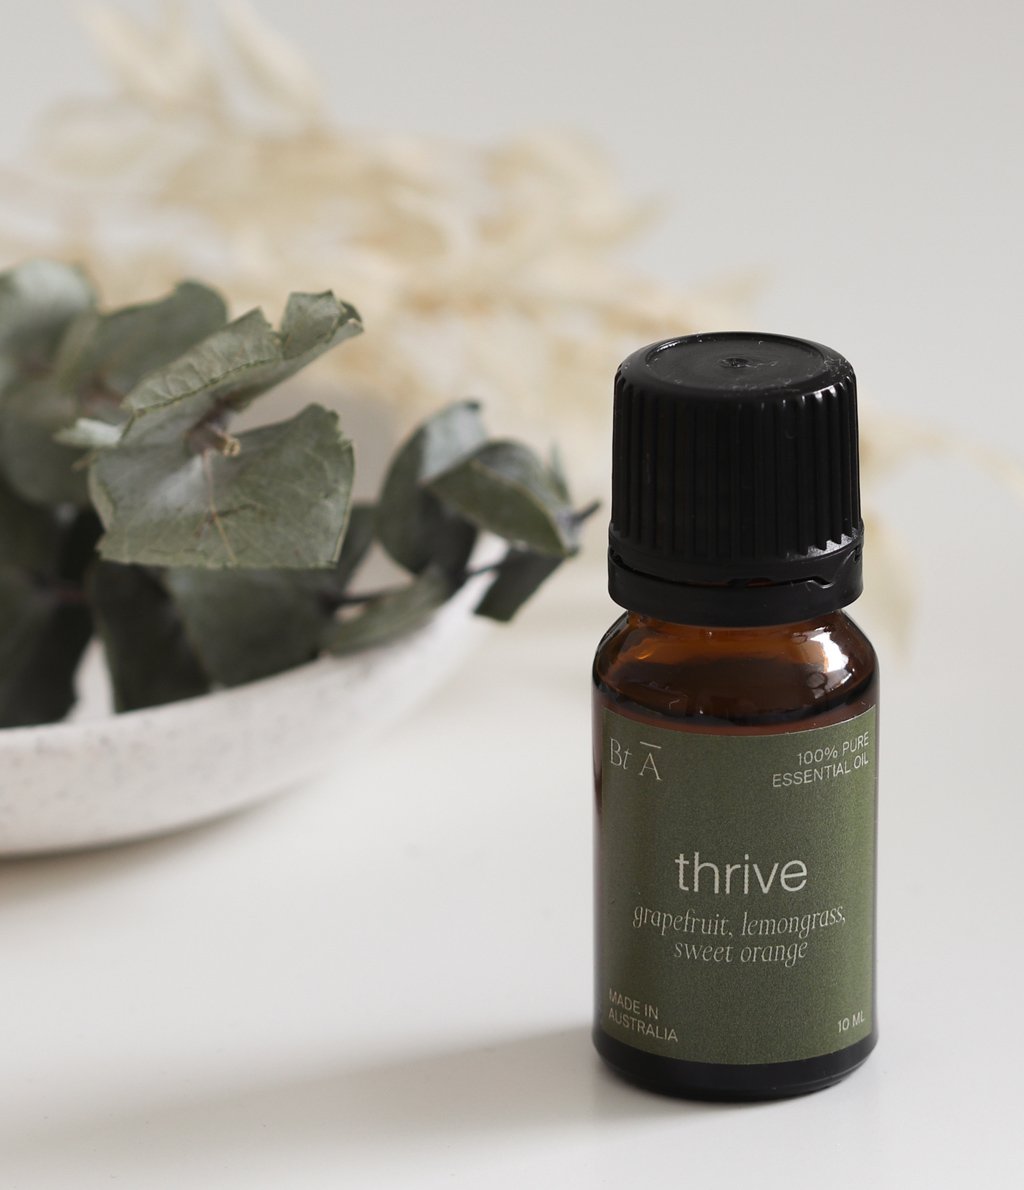 Thrive Pure Essential Oil Blend